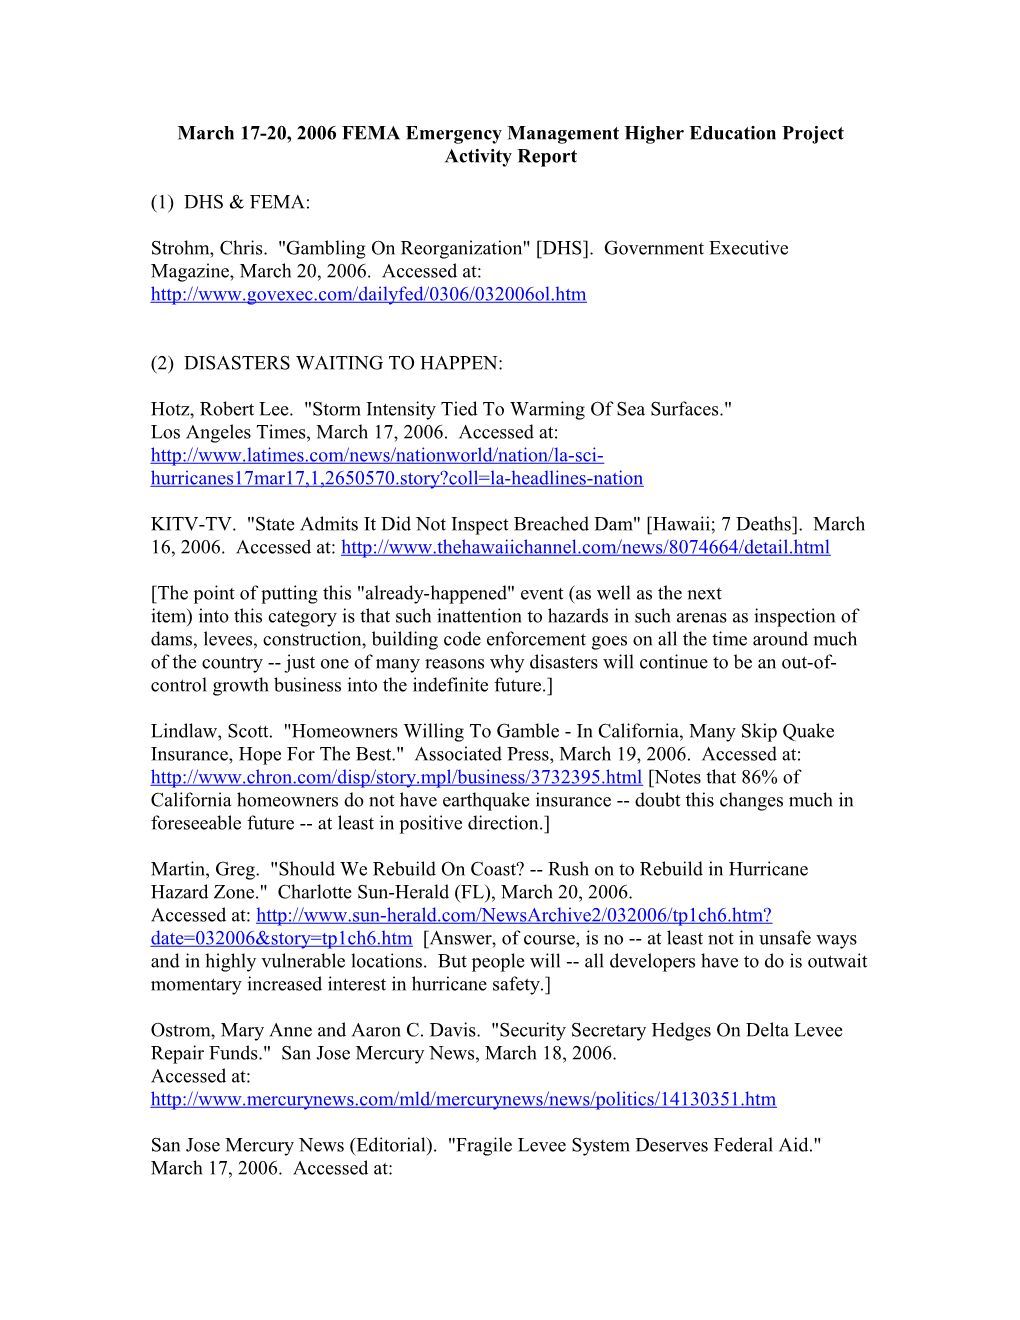 March 17-20, 2006 FEMA Emergency Management Higher Education Project Activity Report